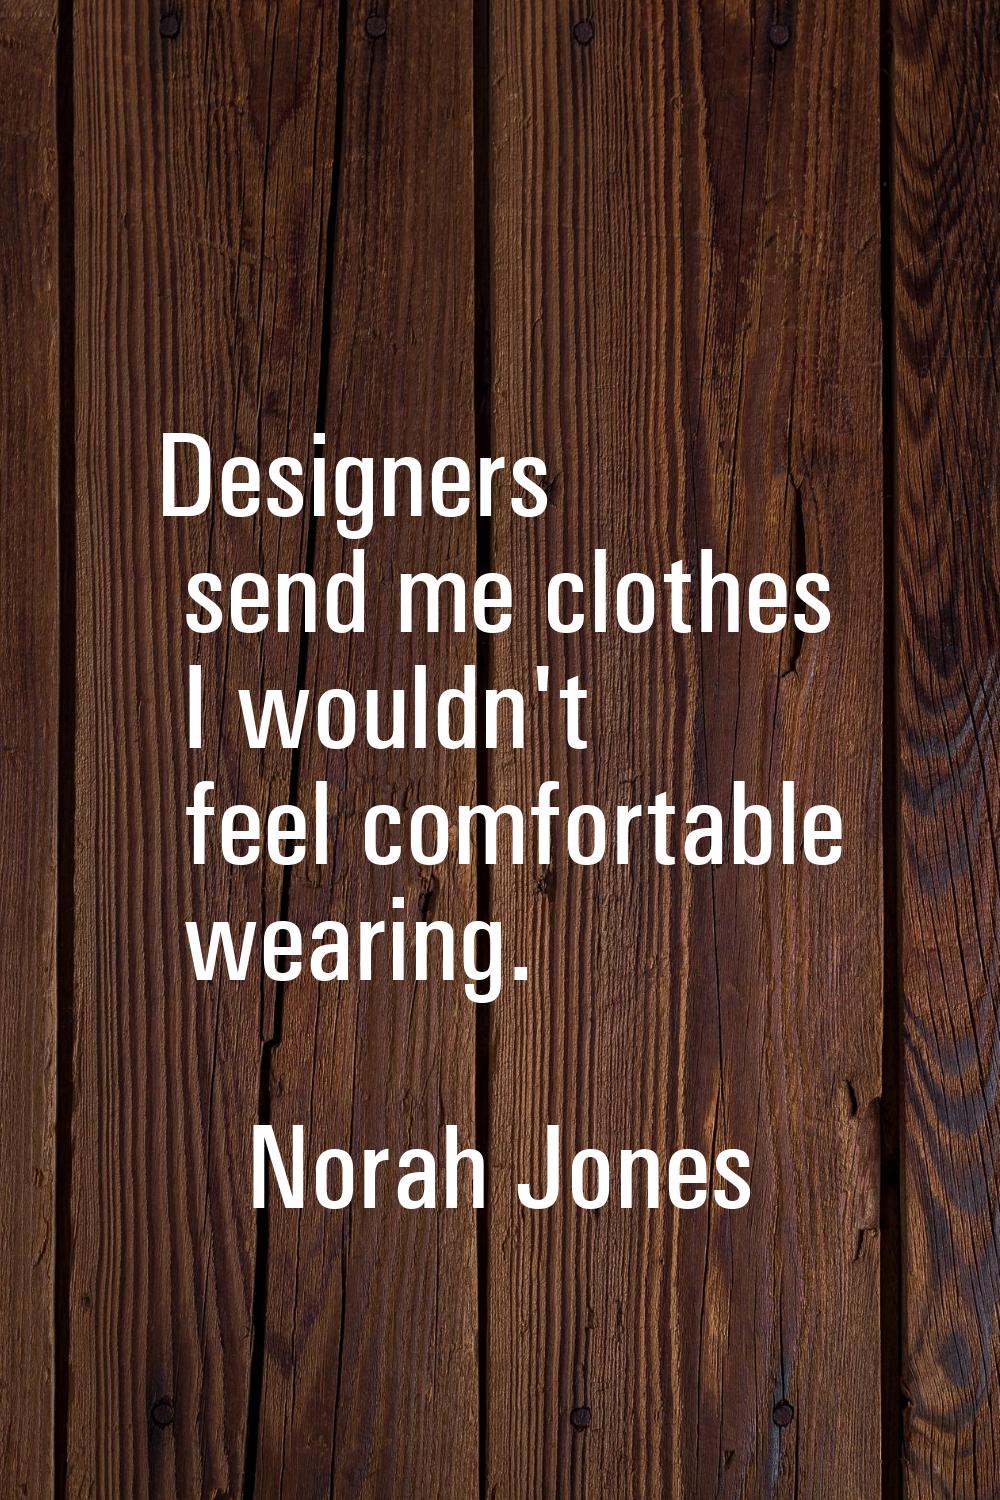 Designers send me clothes I wouldn't feel comfortable wearing.